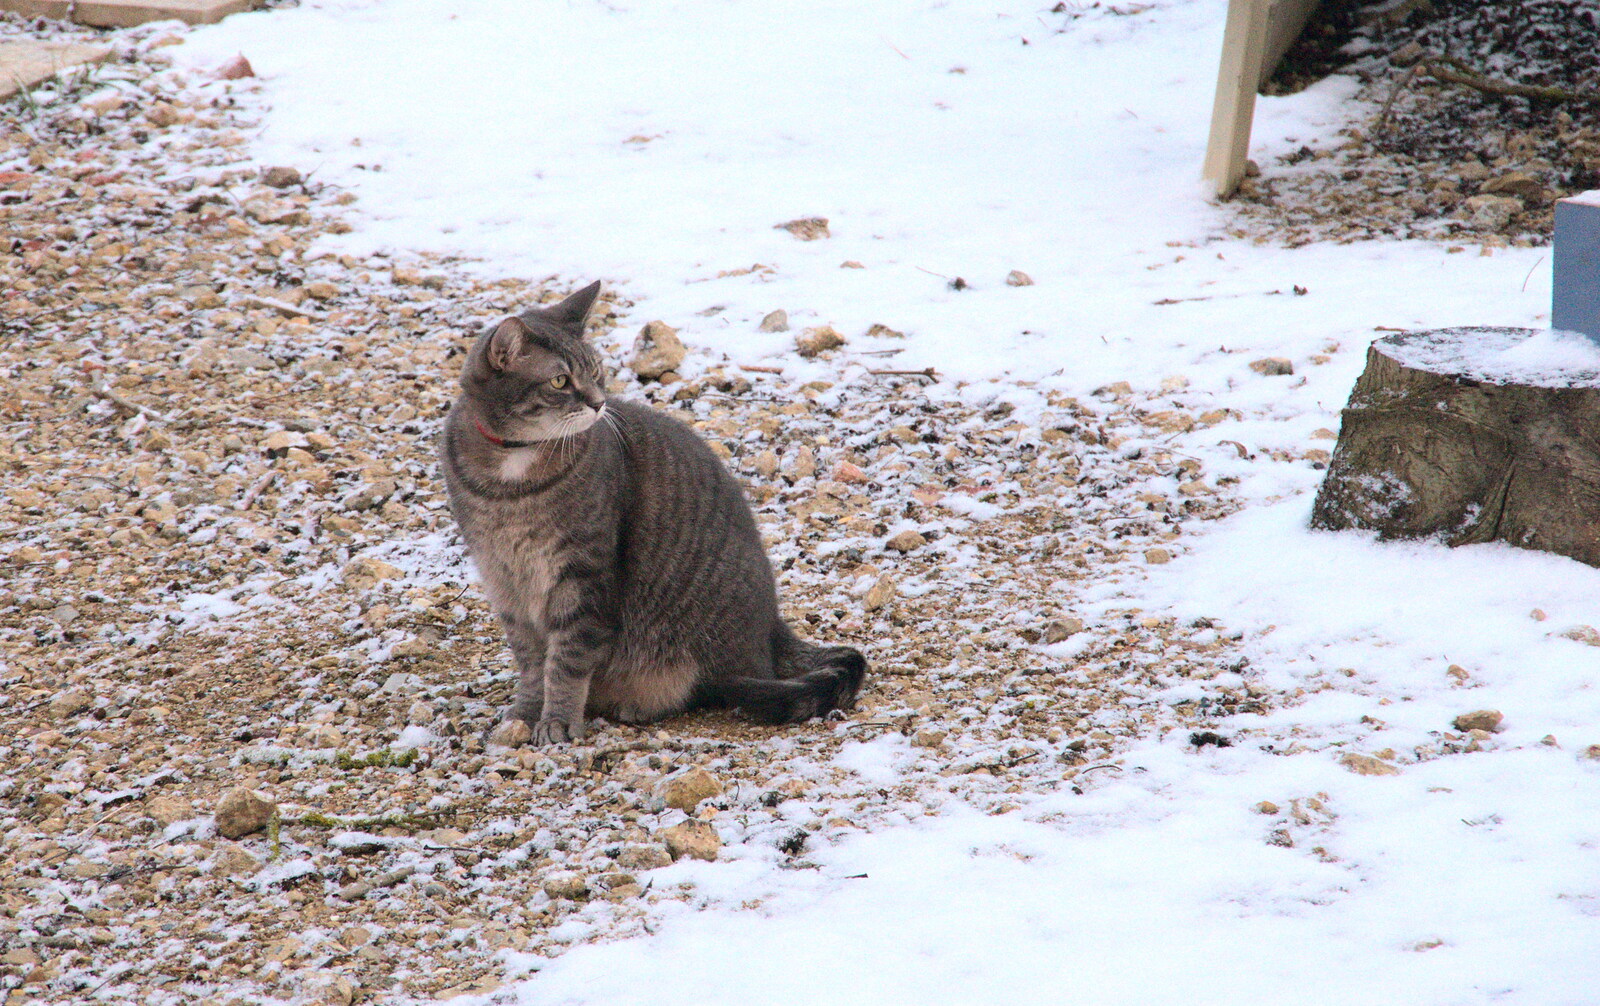 Boris - stripey cat - looks unimpressed from Snowmageddon: The Beast From the East, Suffolk and London - 27th February 2018